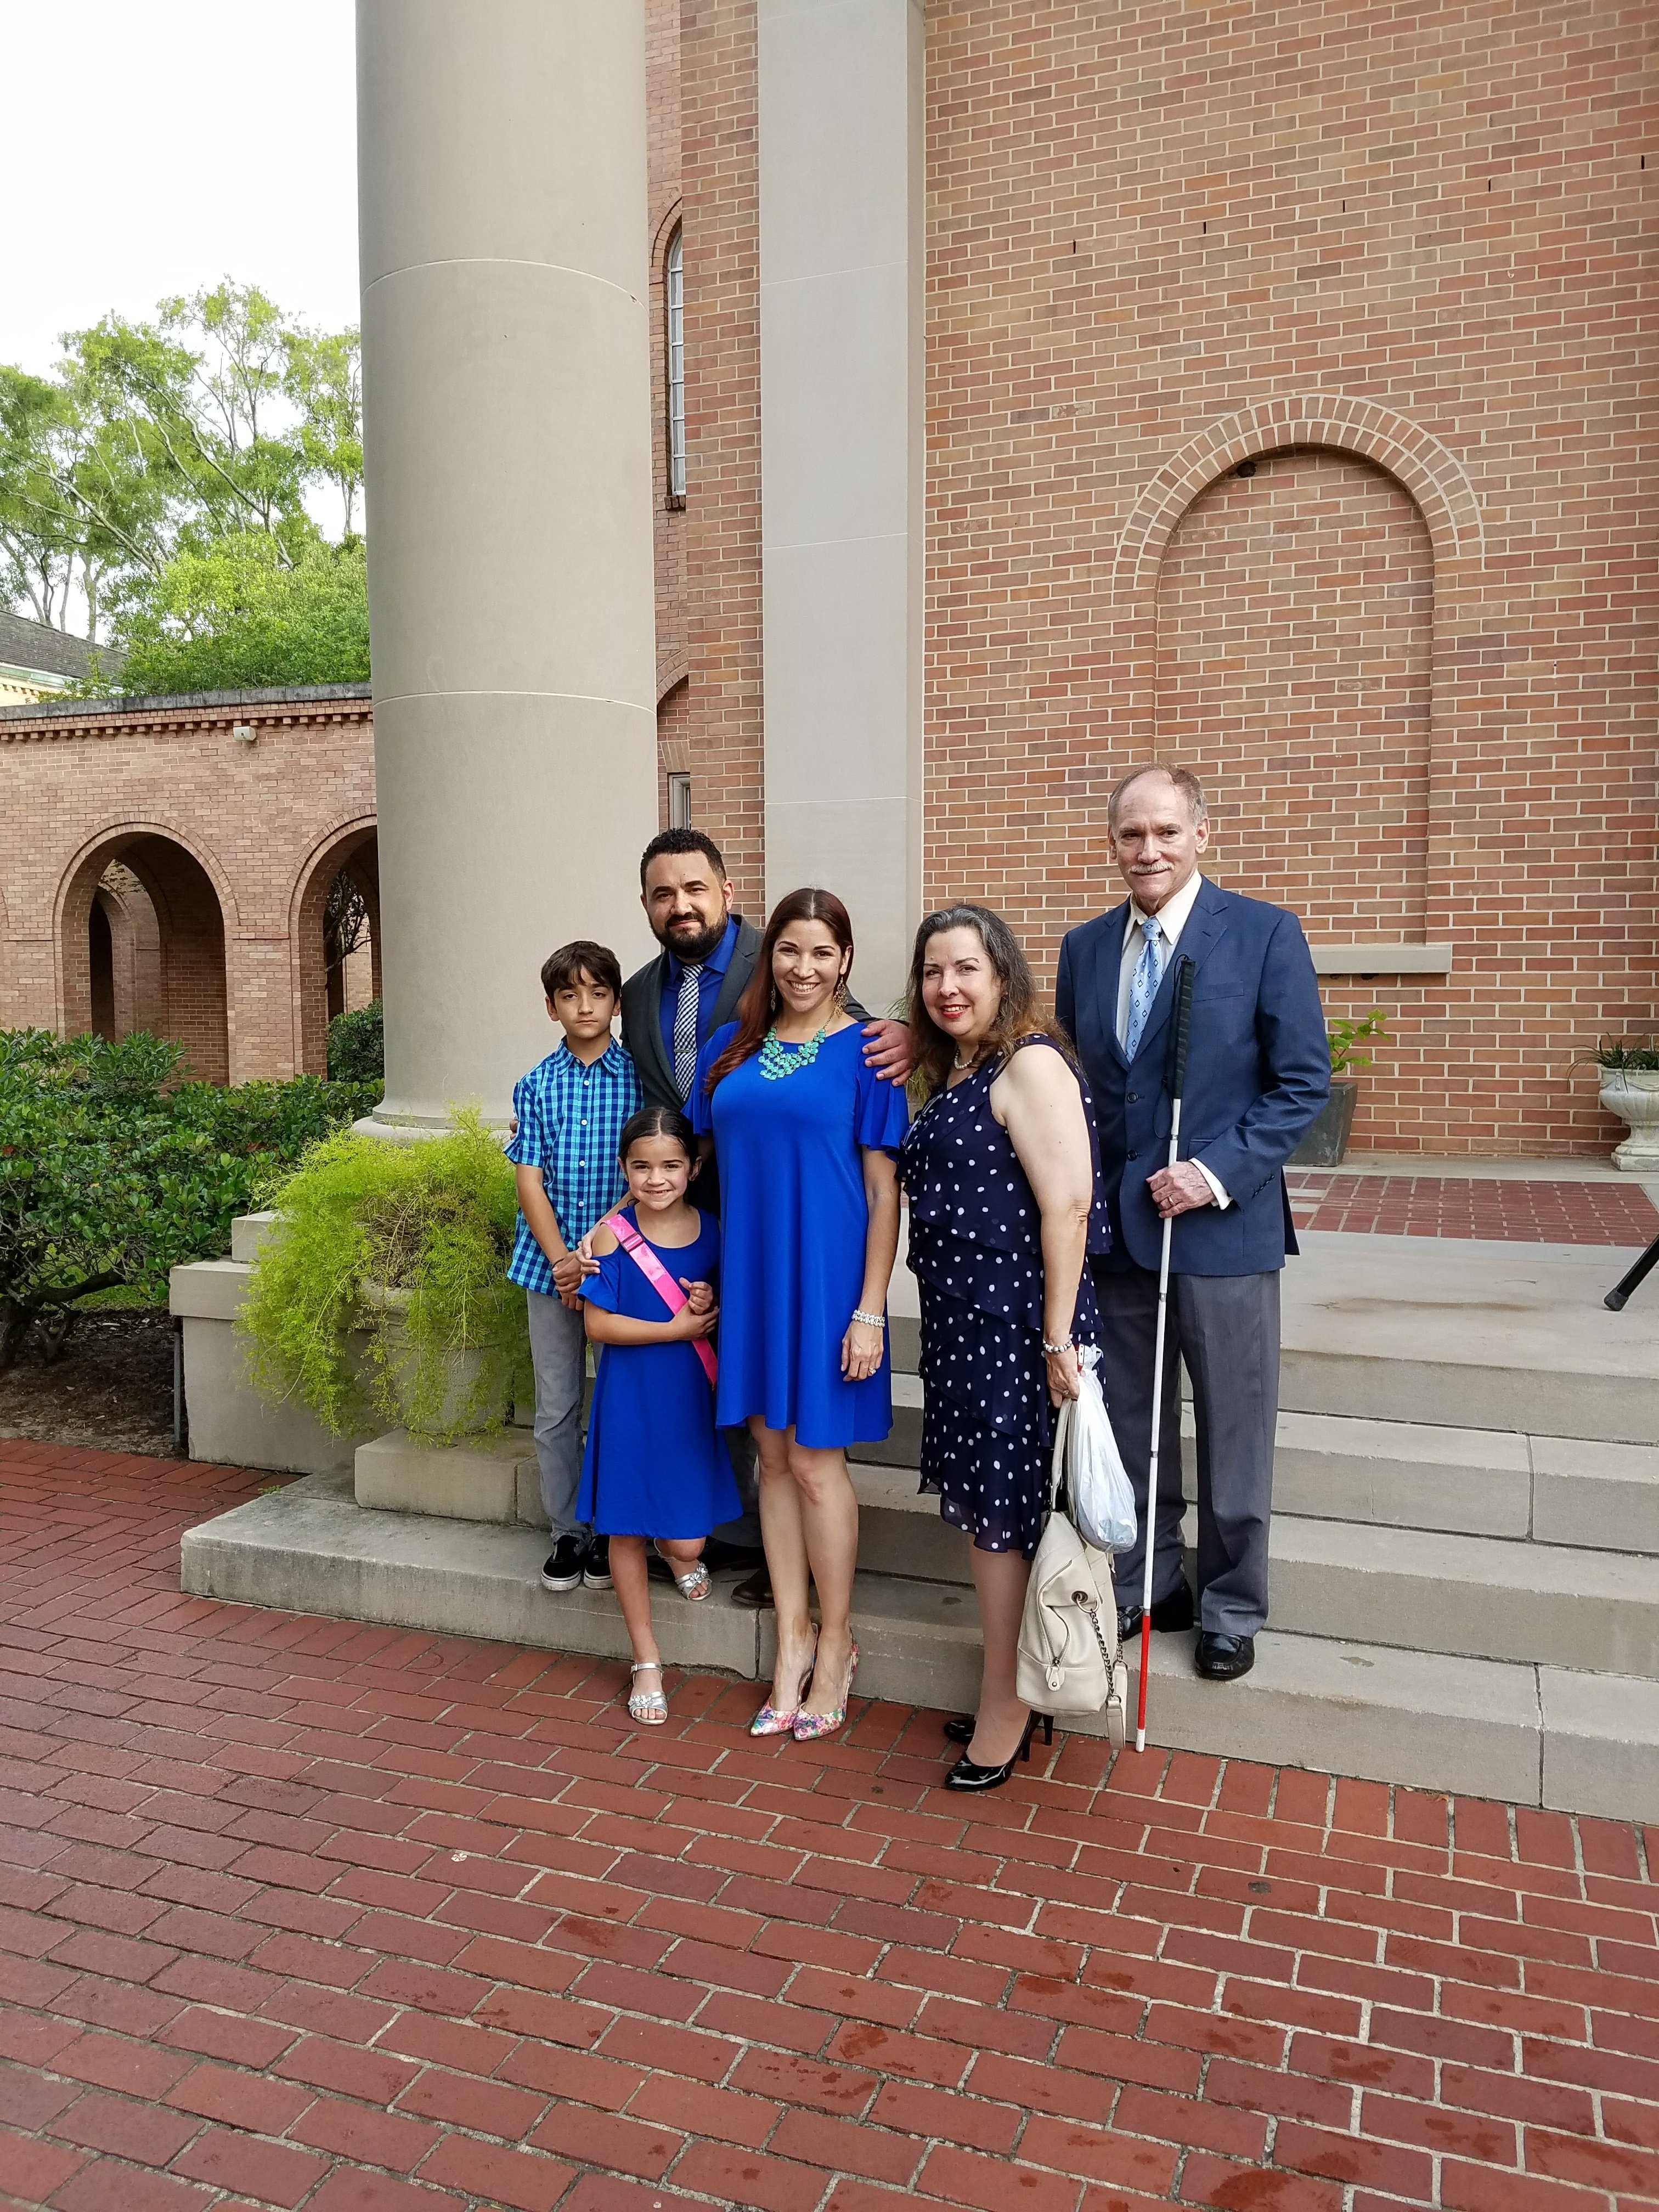 Coppelia and her family, including her parents, celebrating Easter at Second Baptist Church